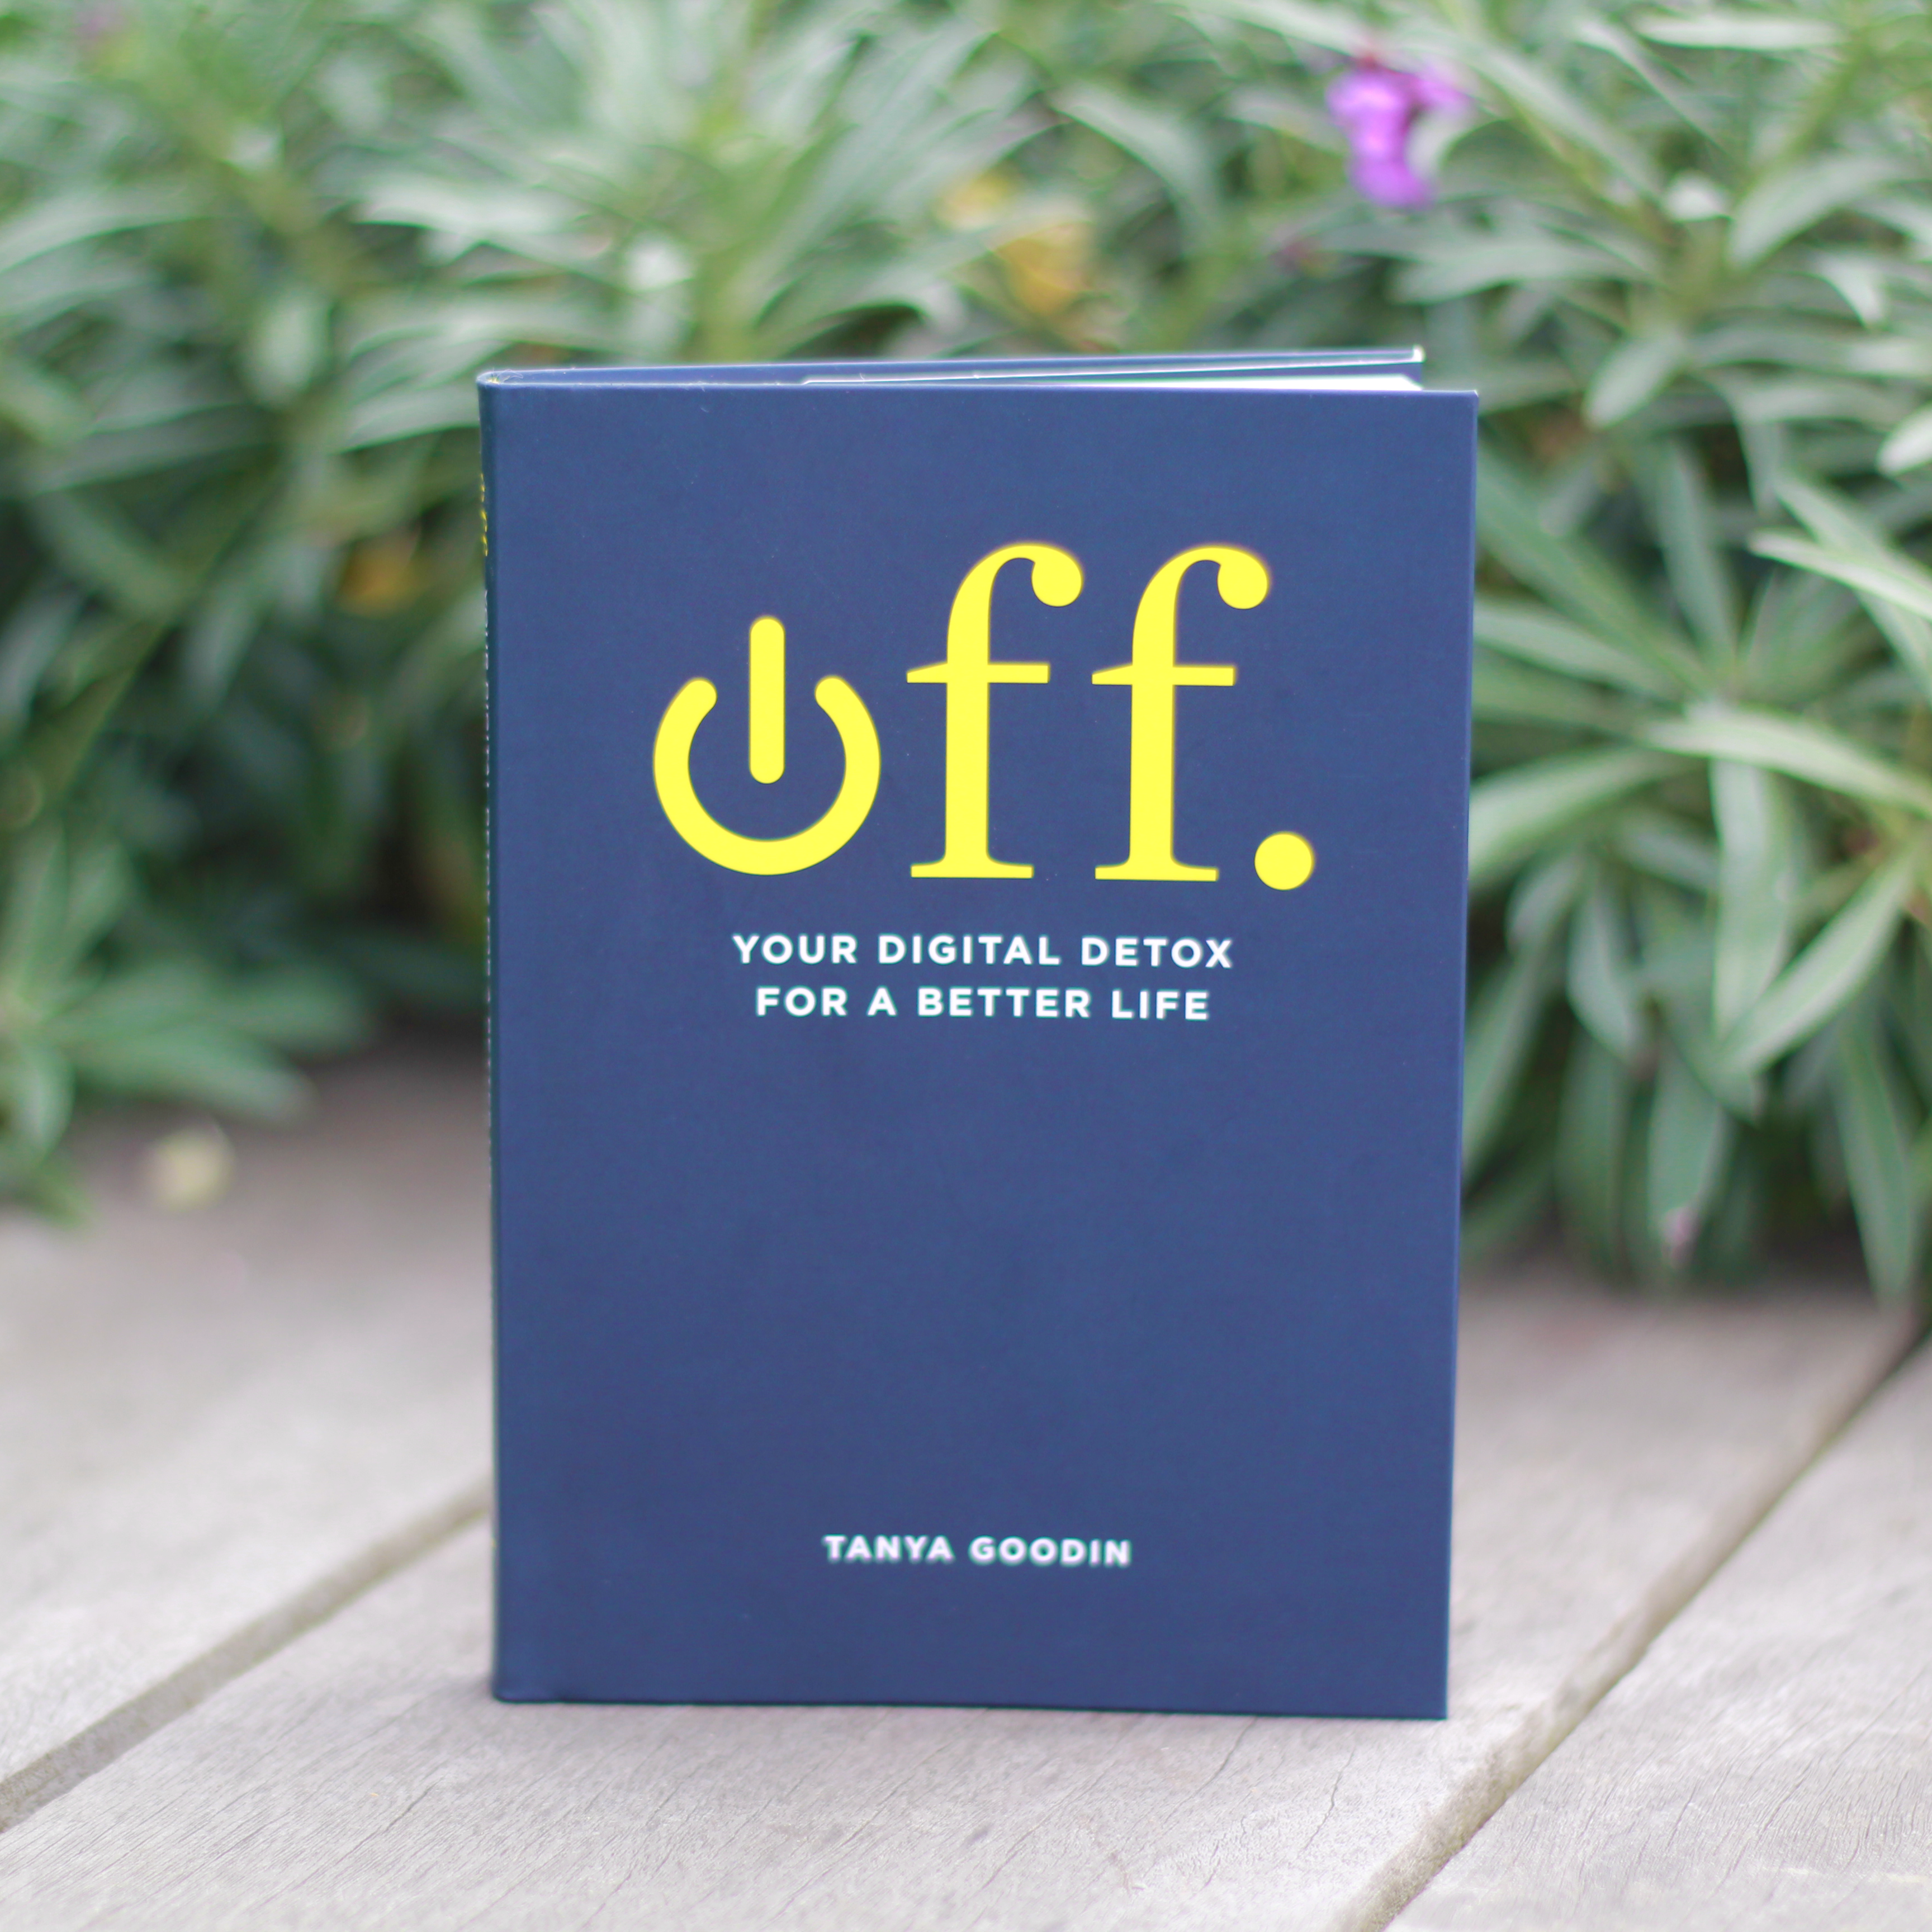 Introducing our wonderful new book ‘OFF. Your Digital Detox for a Better Life’